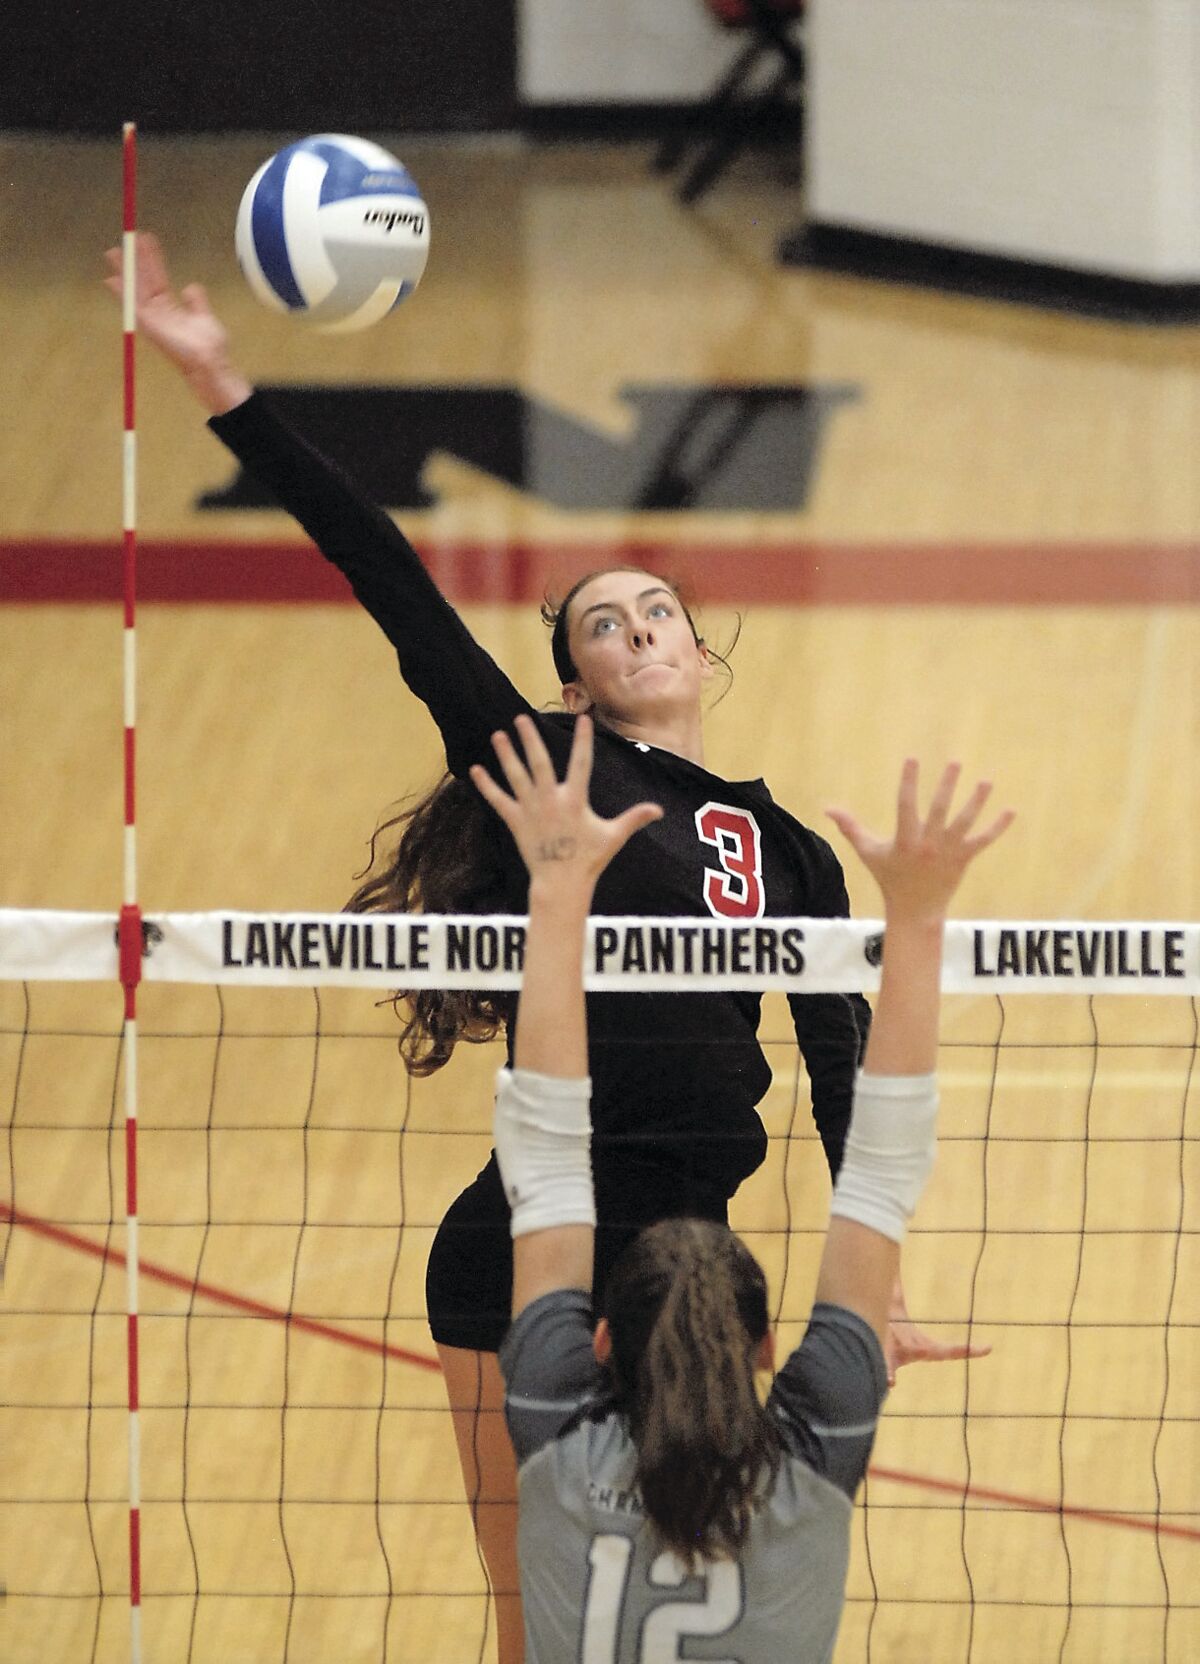 Panther spikers come up big in season opener